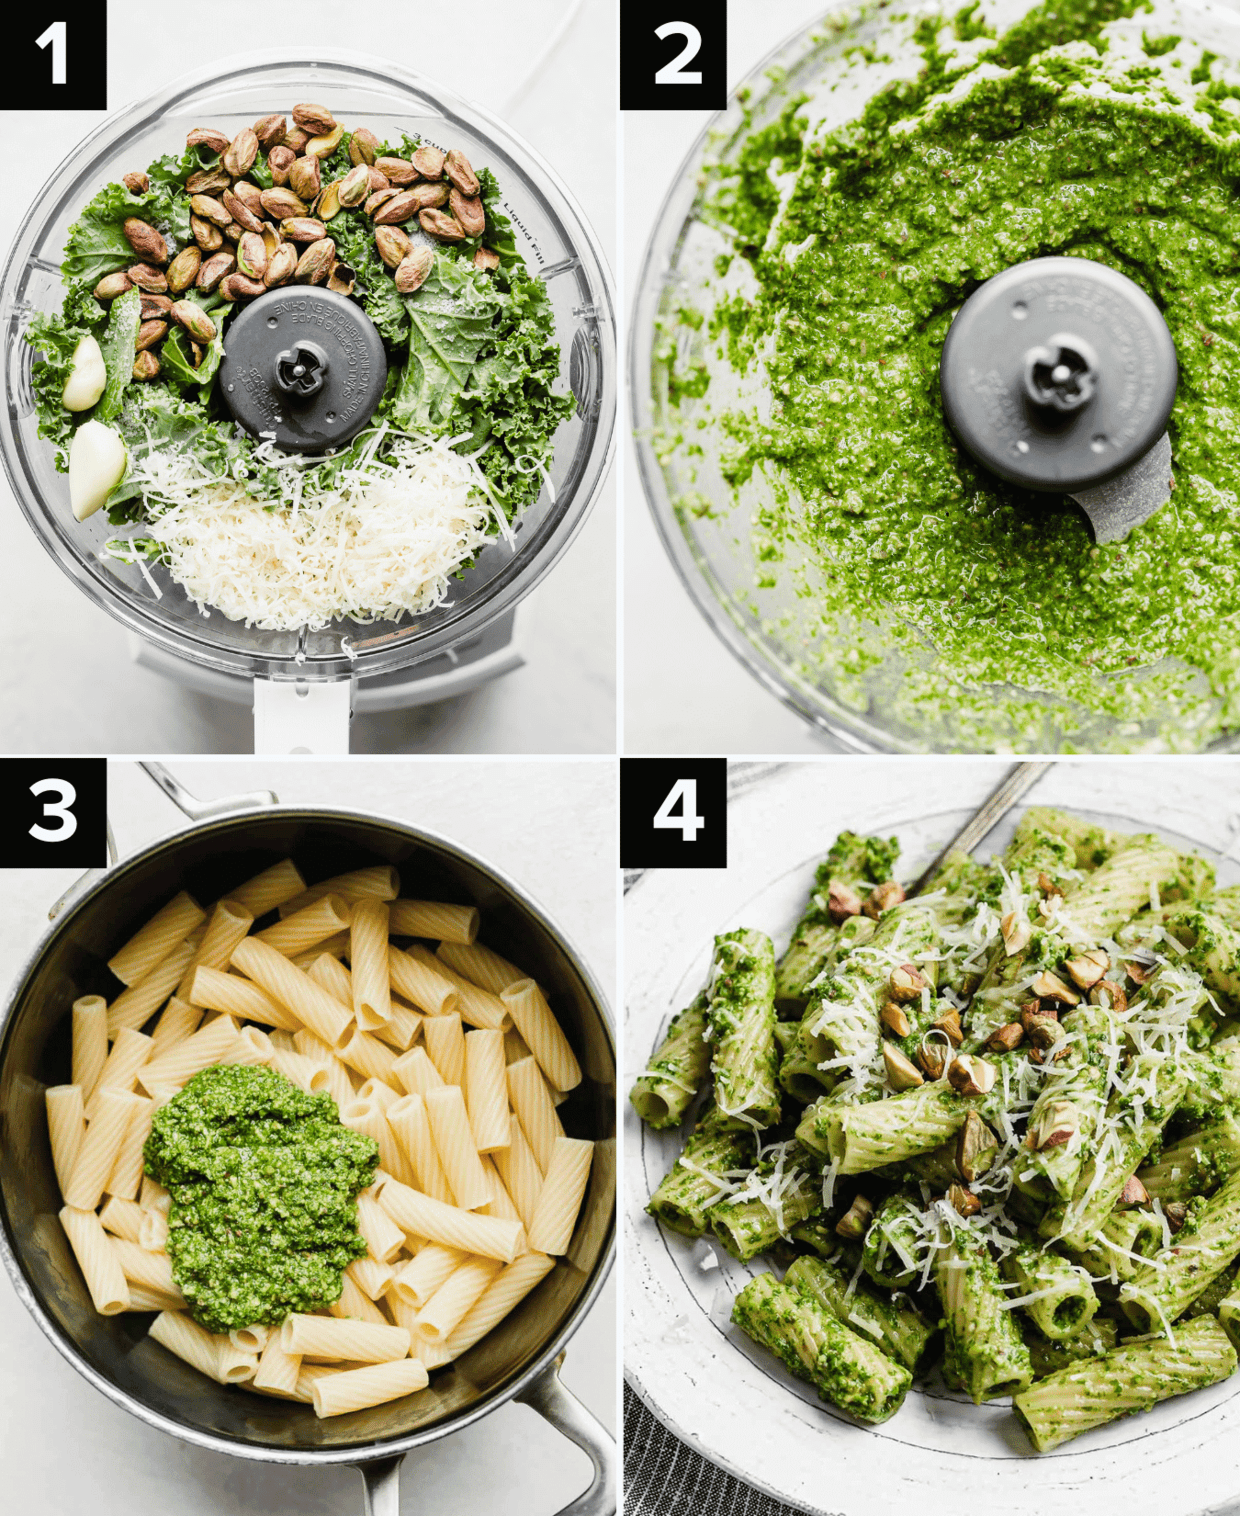 Four images showing how to make kale pesto, then adding it to cooked pasta, and tossing to coat.